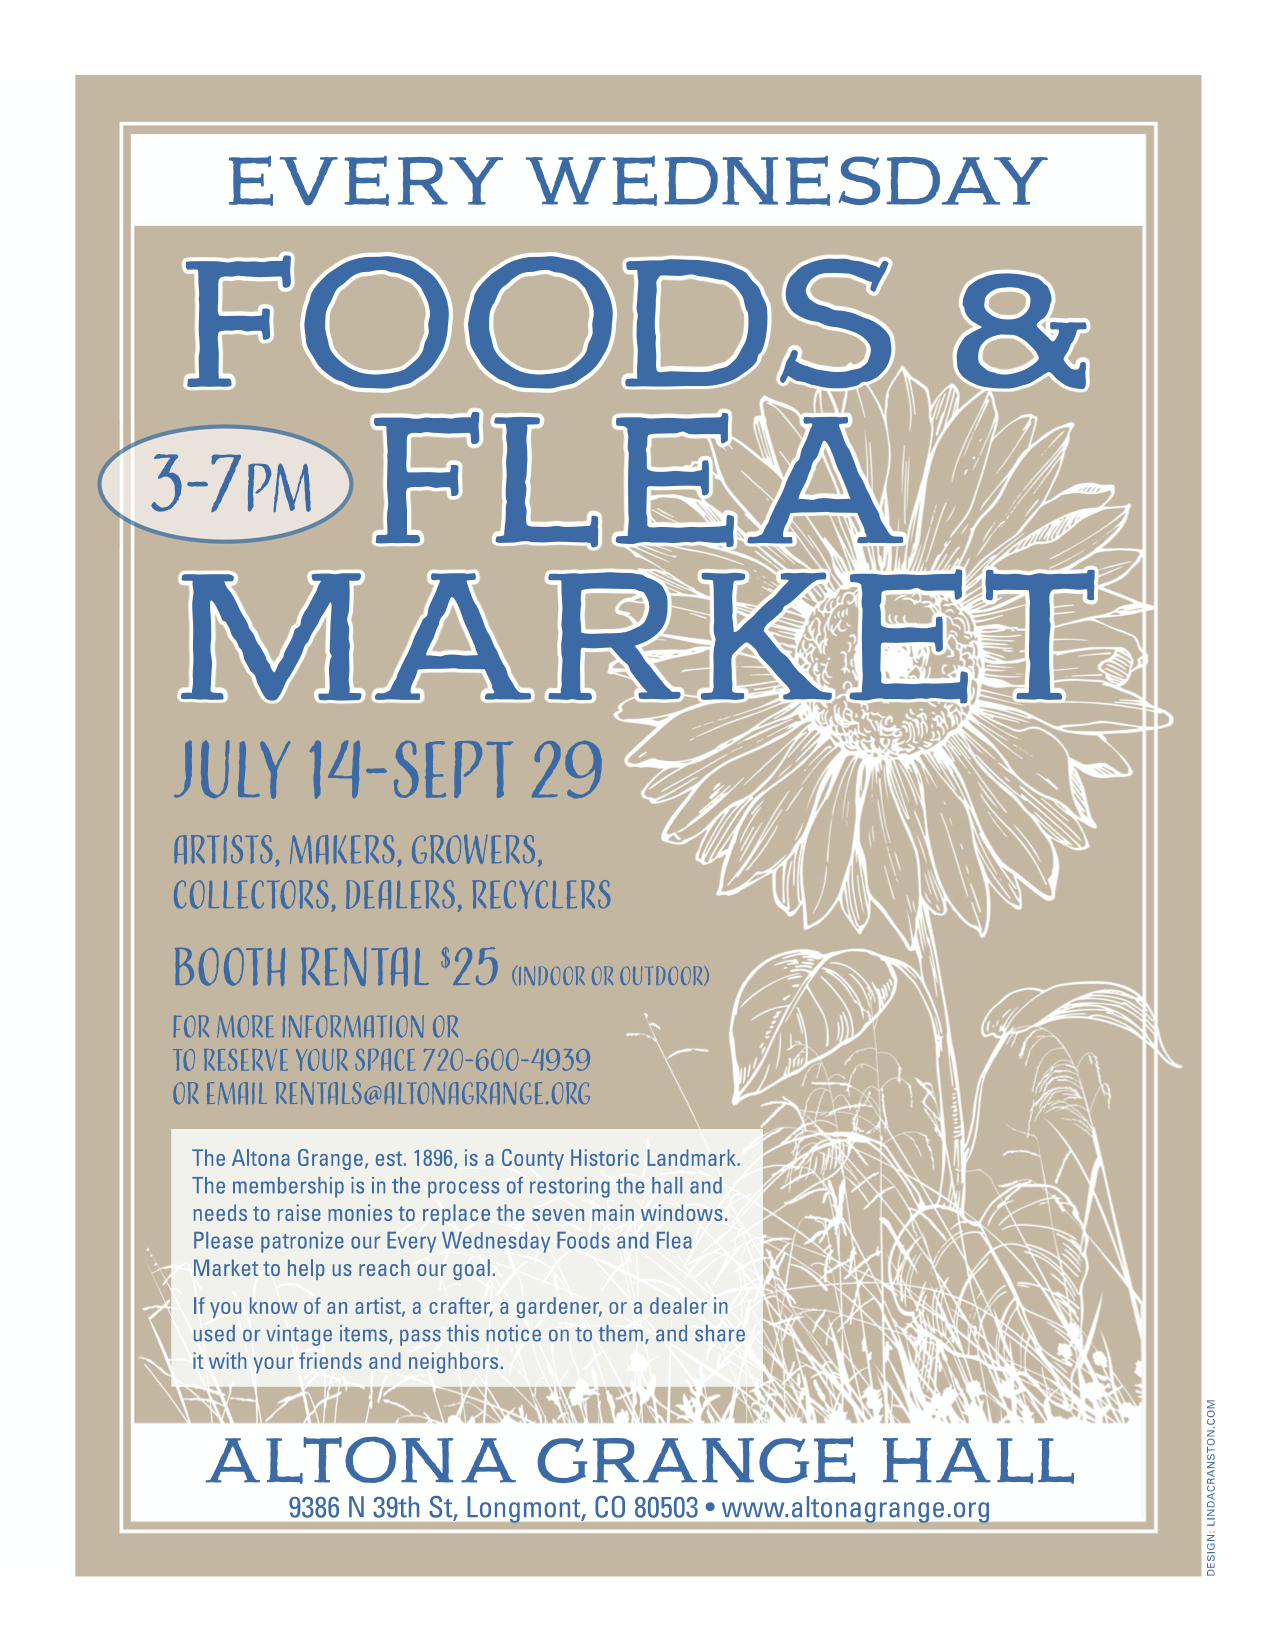 Foods & Flea Market Every Wednesday from July 14th - Sept 29th